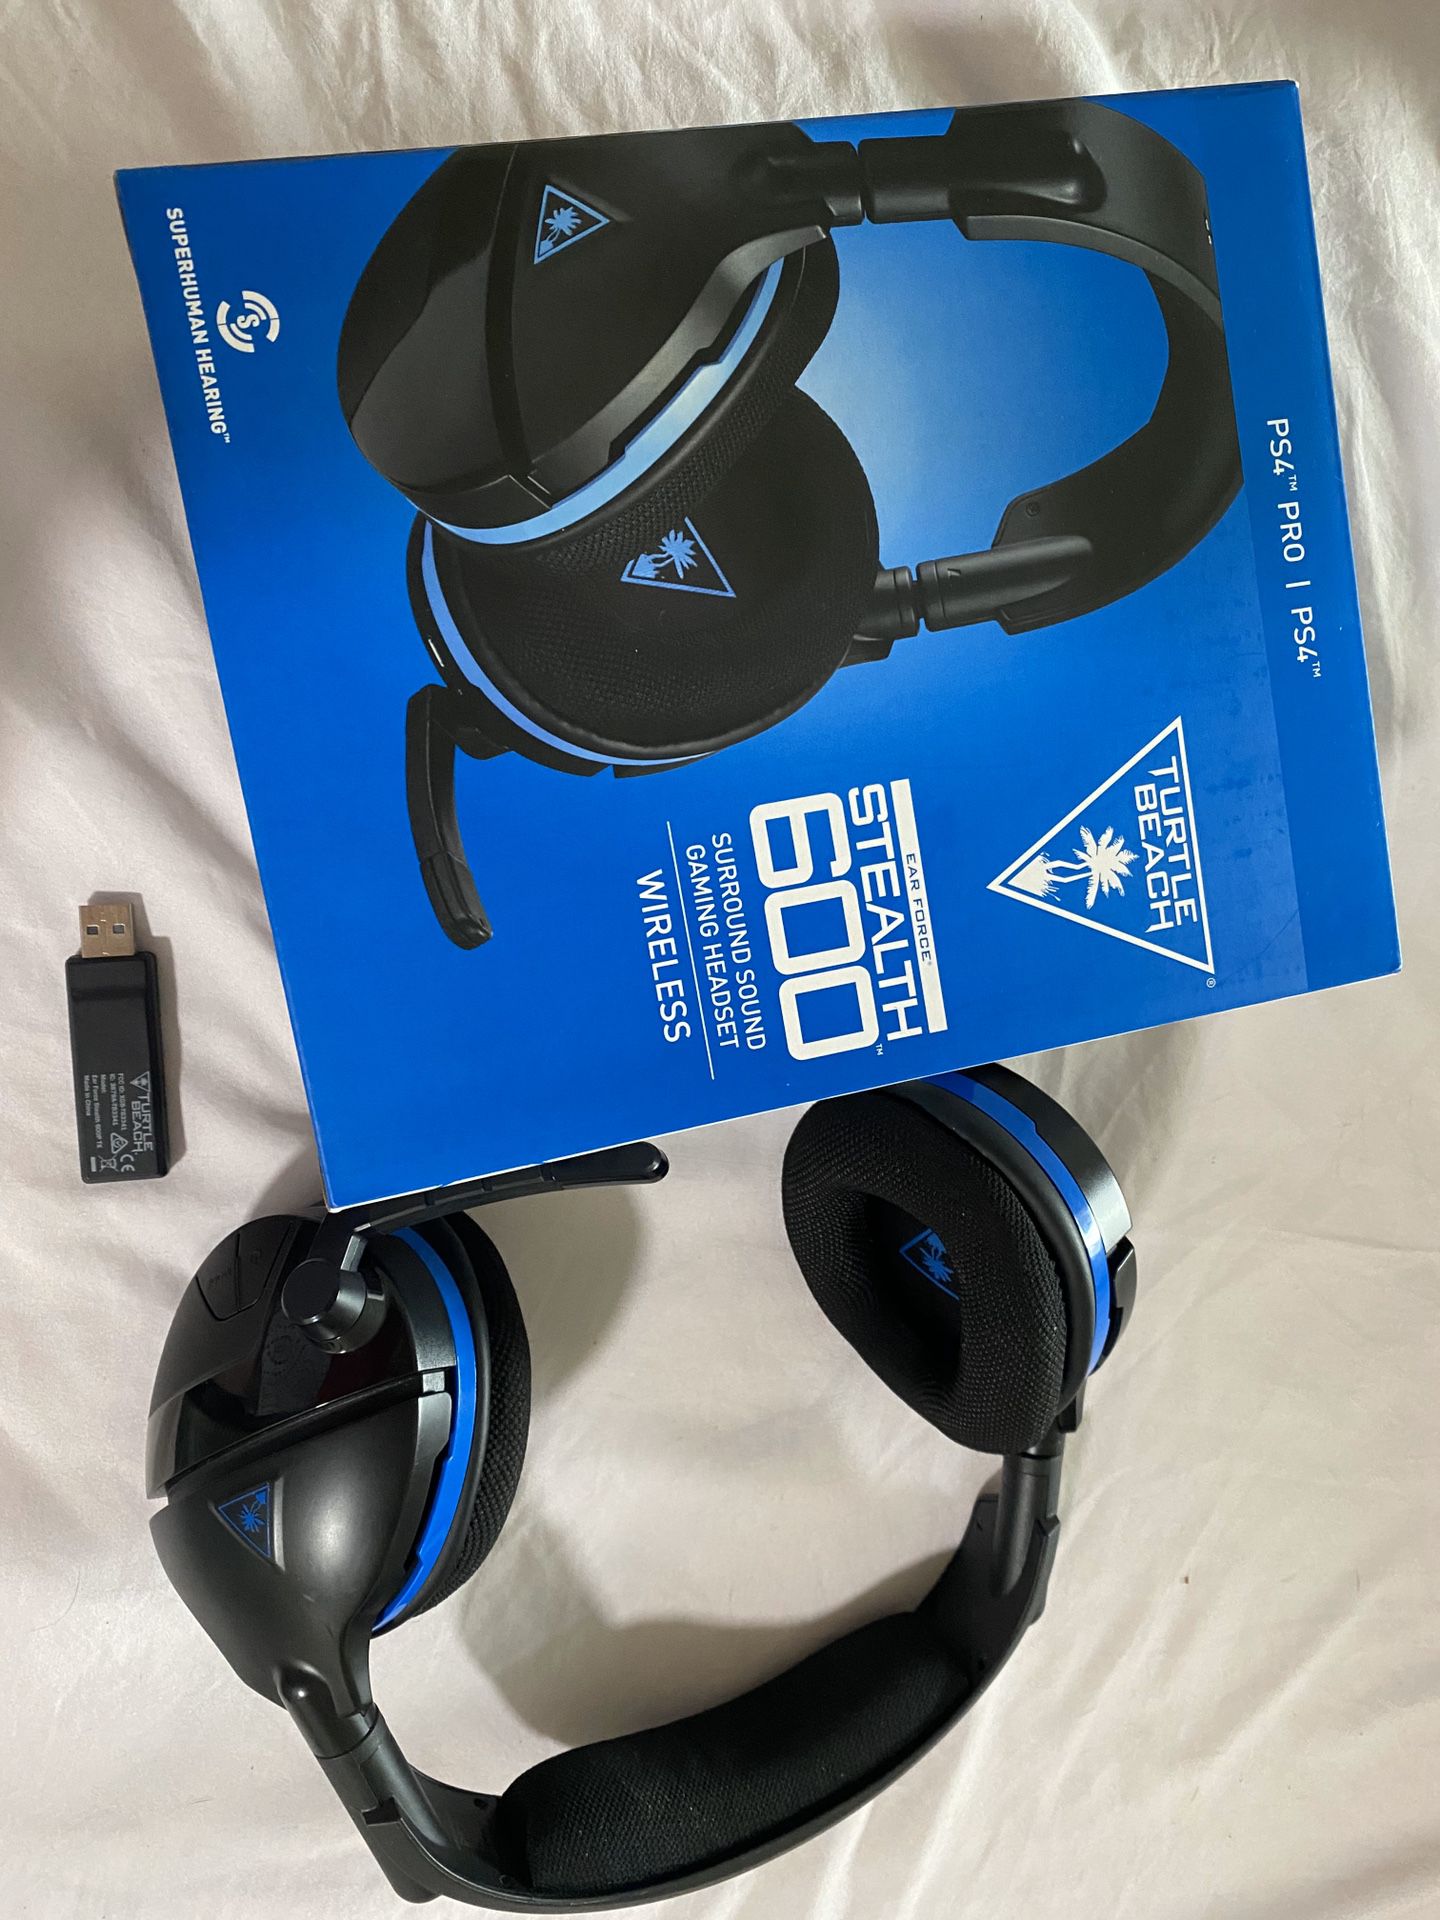 Turtle beach 600 ps4 gaming headset